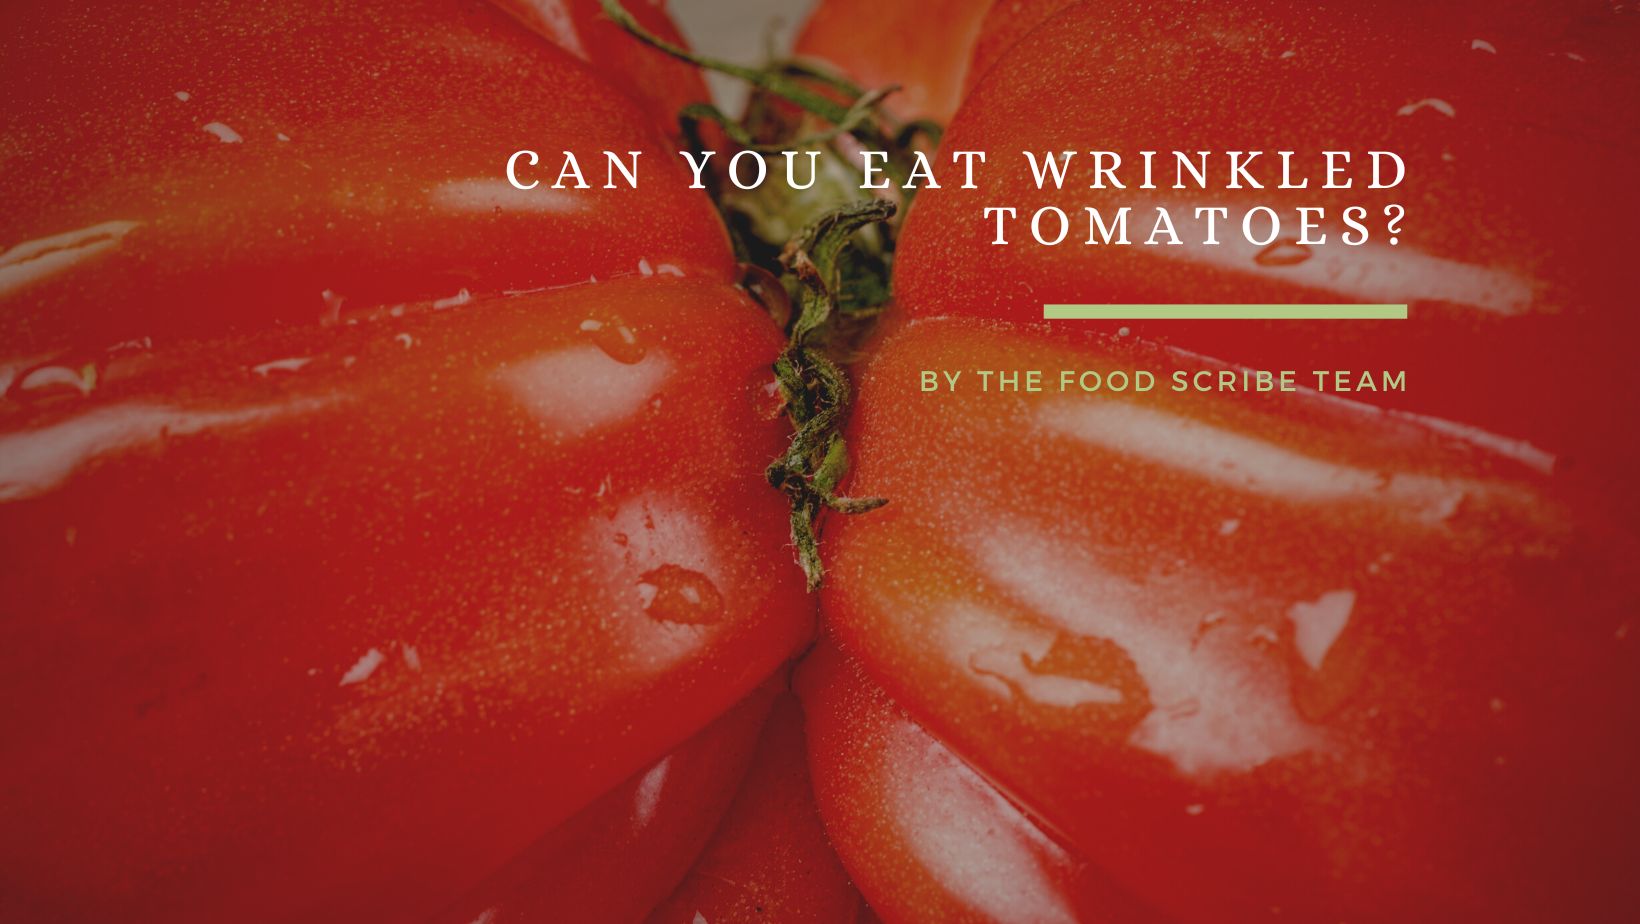 Can You Eat Wrinkled Tomatoes?